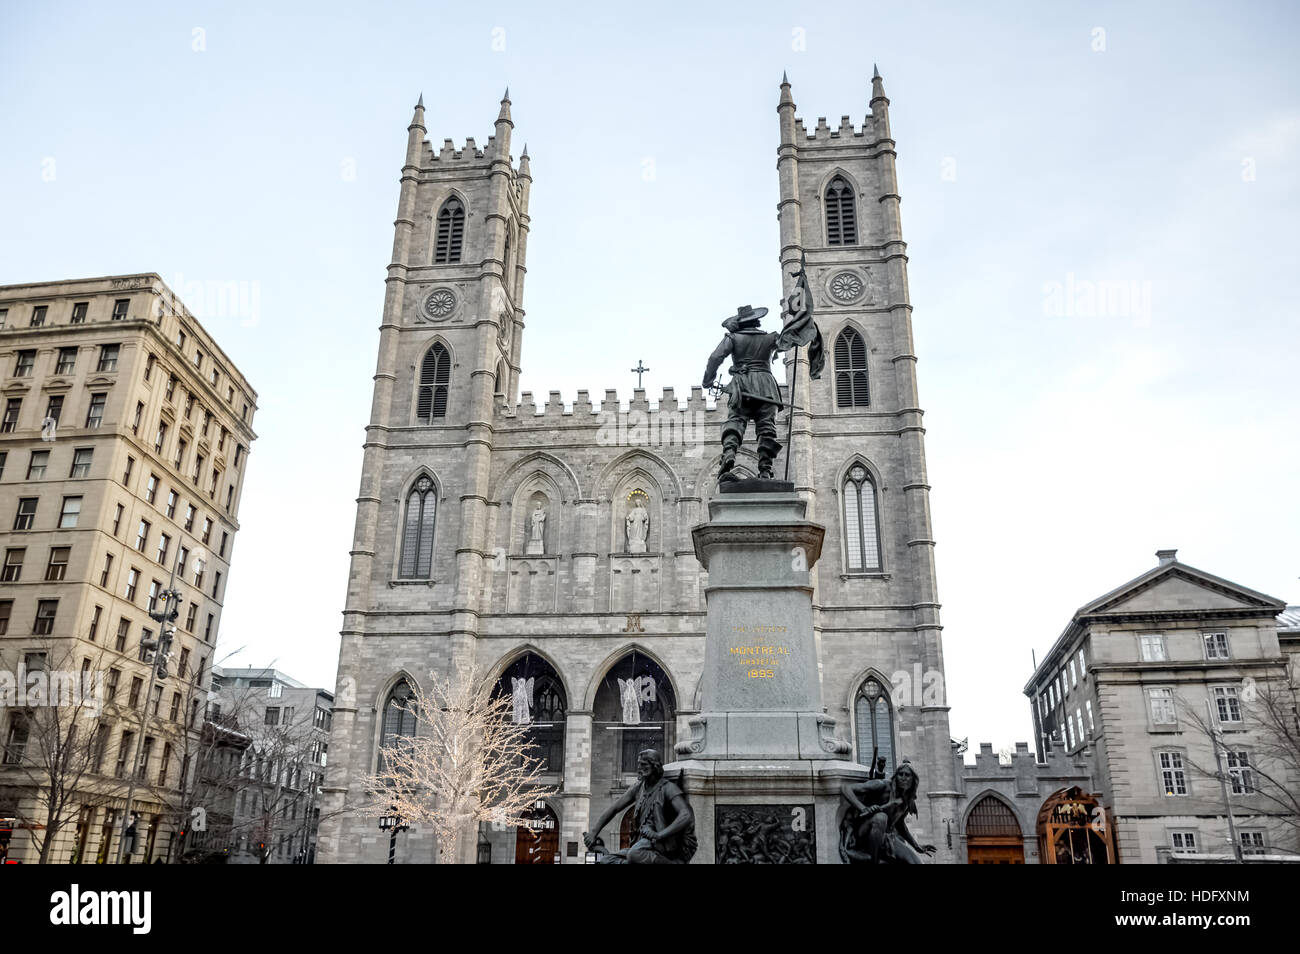 Basilica Notre Dame with statue of Paul de Chomedey de Maisonneuve, founder of Montreal. In Old Town, Montreal, Canada. Stock Photo